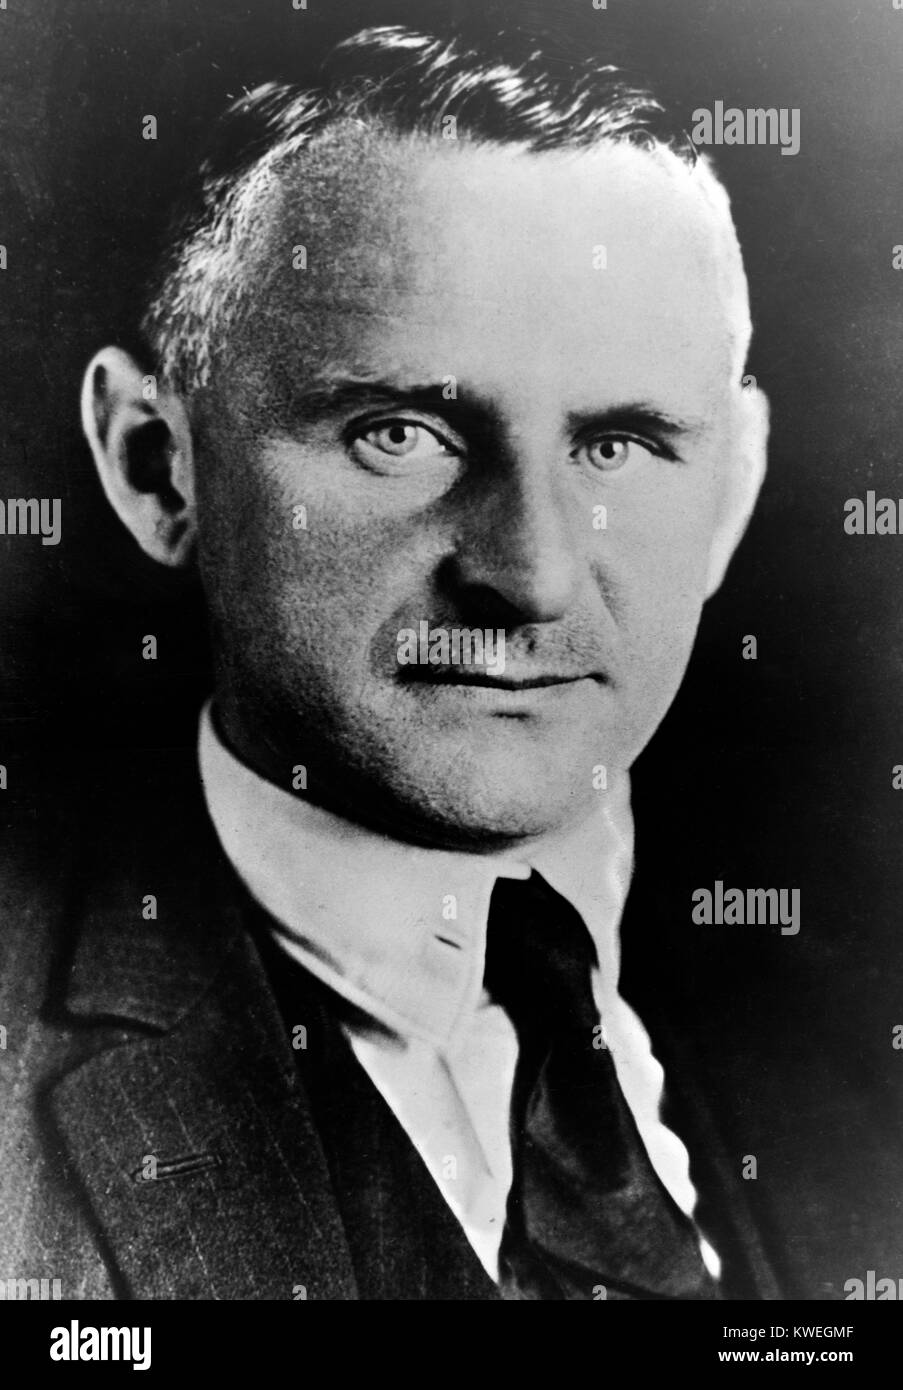 Dr. Karl Friedrich Geerdeter,  (31 July 1884 – 2 February 1945) was a monarchist conservative German politician, executive, economist, civil servant and opponent of the Nazi regime. Had the 20 July plot to assassinate Hitler of 1944 succeeded, Goerdeler would have served as the Chancellor of the new government. He was executed by hanging on 2 February 1945. Stock Photo